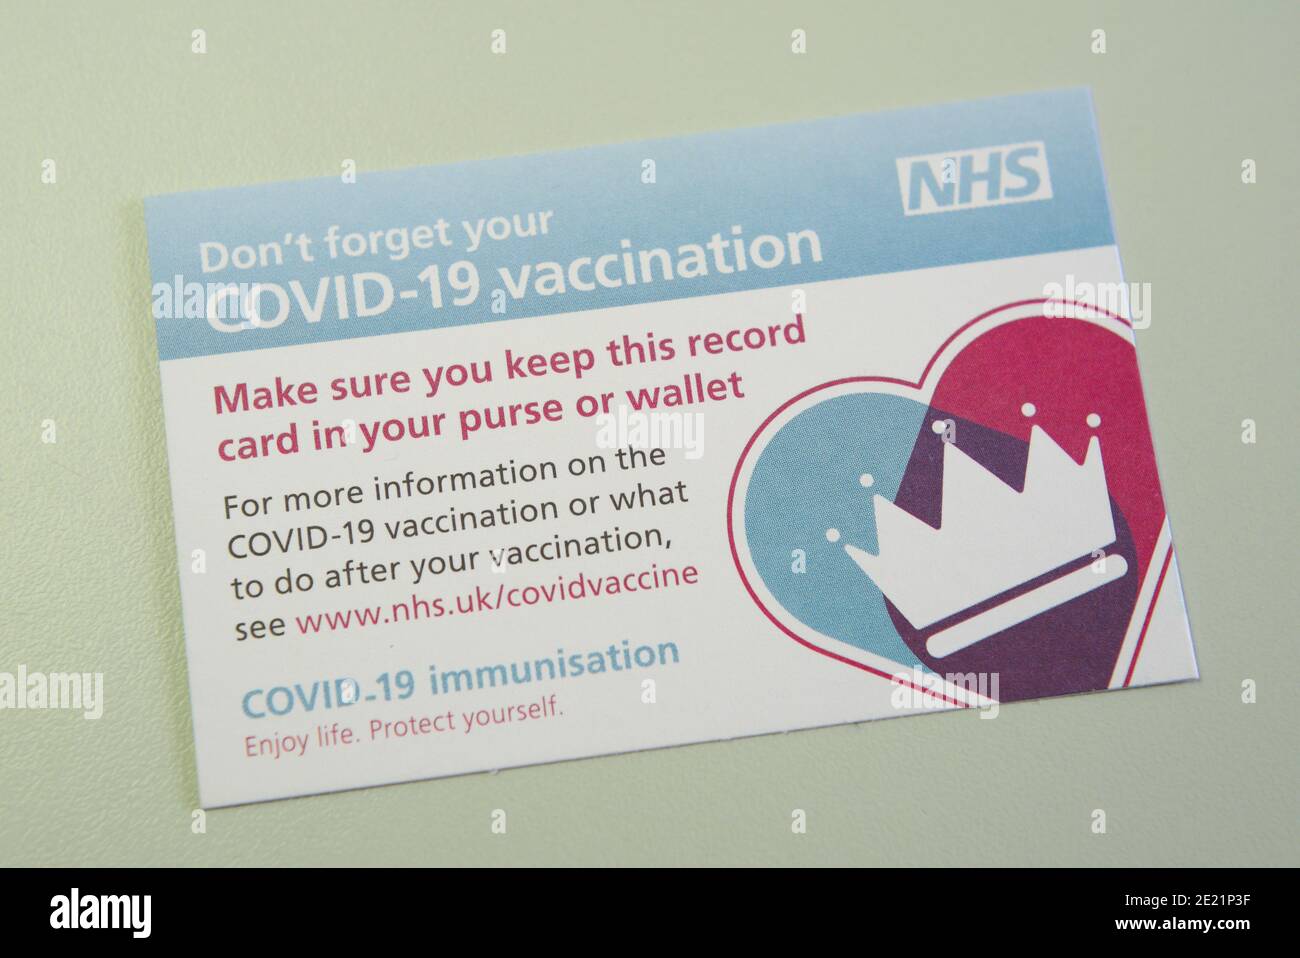 Covid-19 vaccination record card given to patients in the UK by the NHS when they have a Covid vaccine. Stock Photo